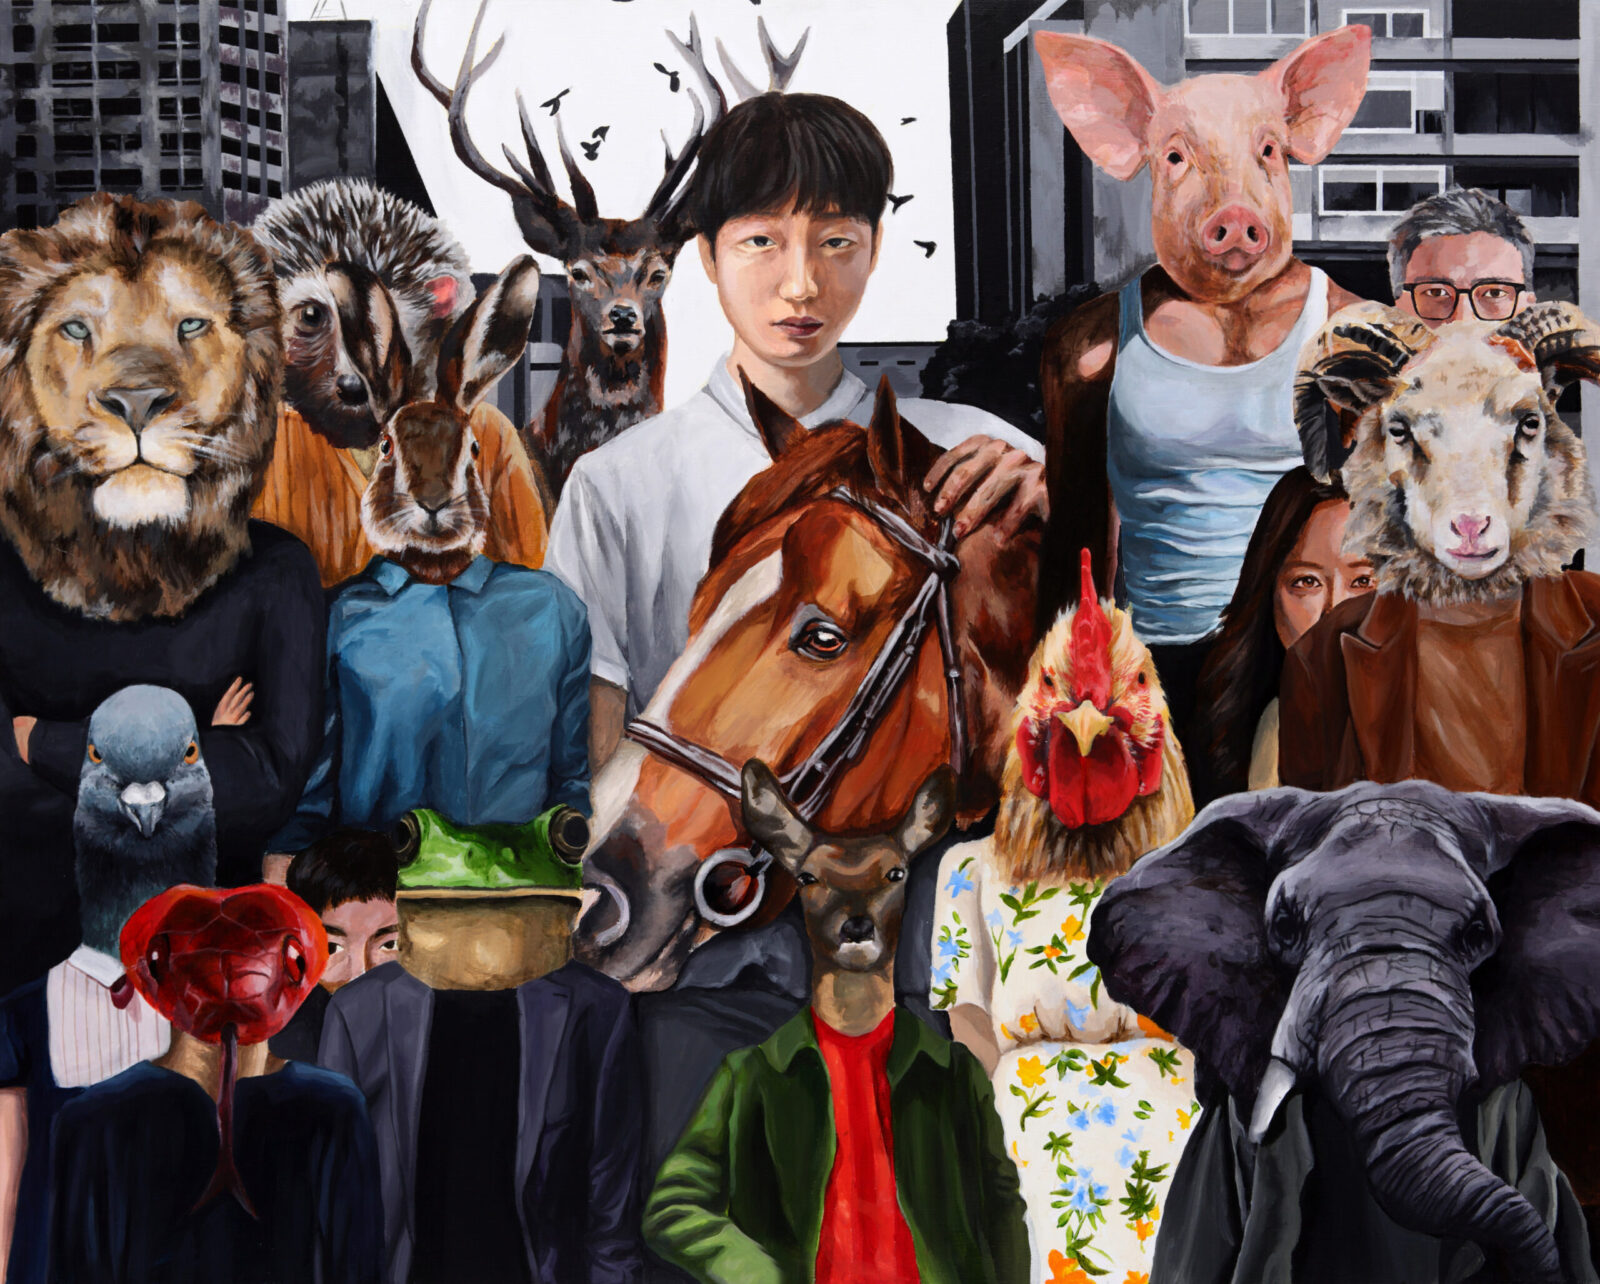 self-portrait with animals dressed in clothes